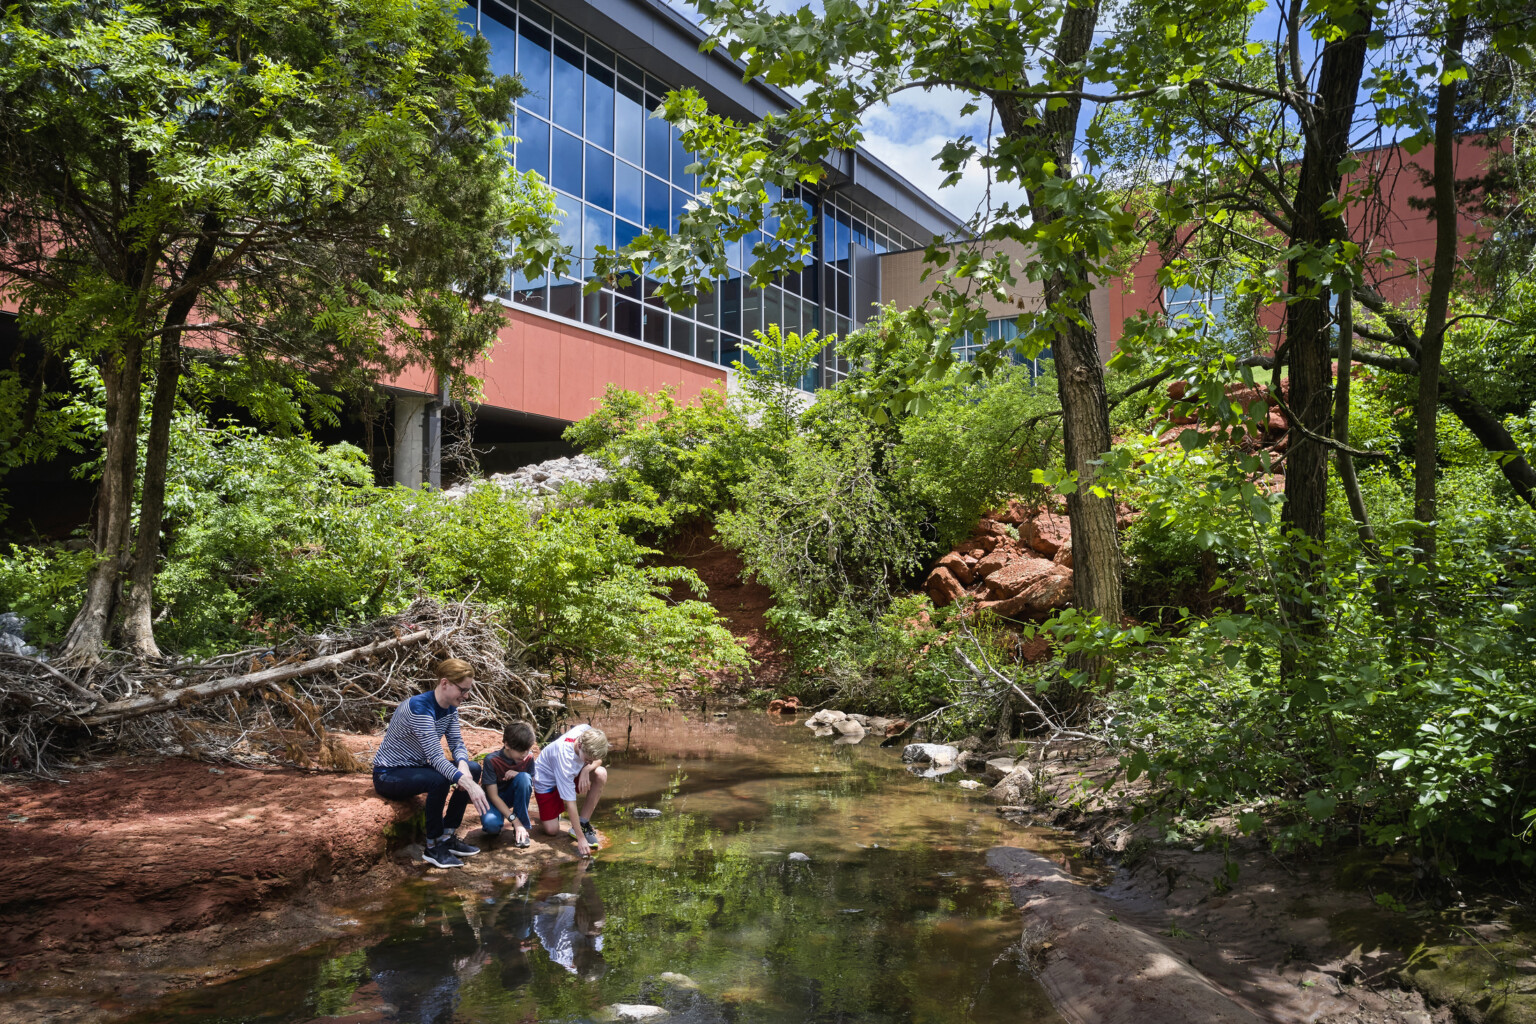 Two young students participating in outdoor learning near modern structure with floor-to-ceiling windows, lush landscaping and a reflecting pond